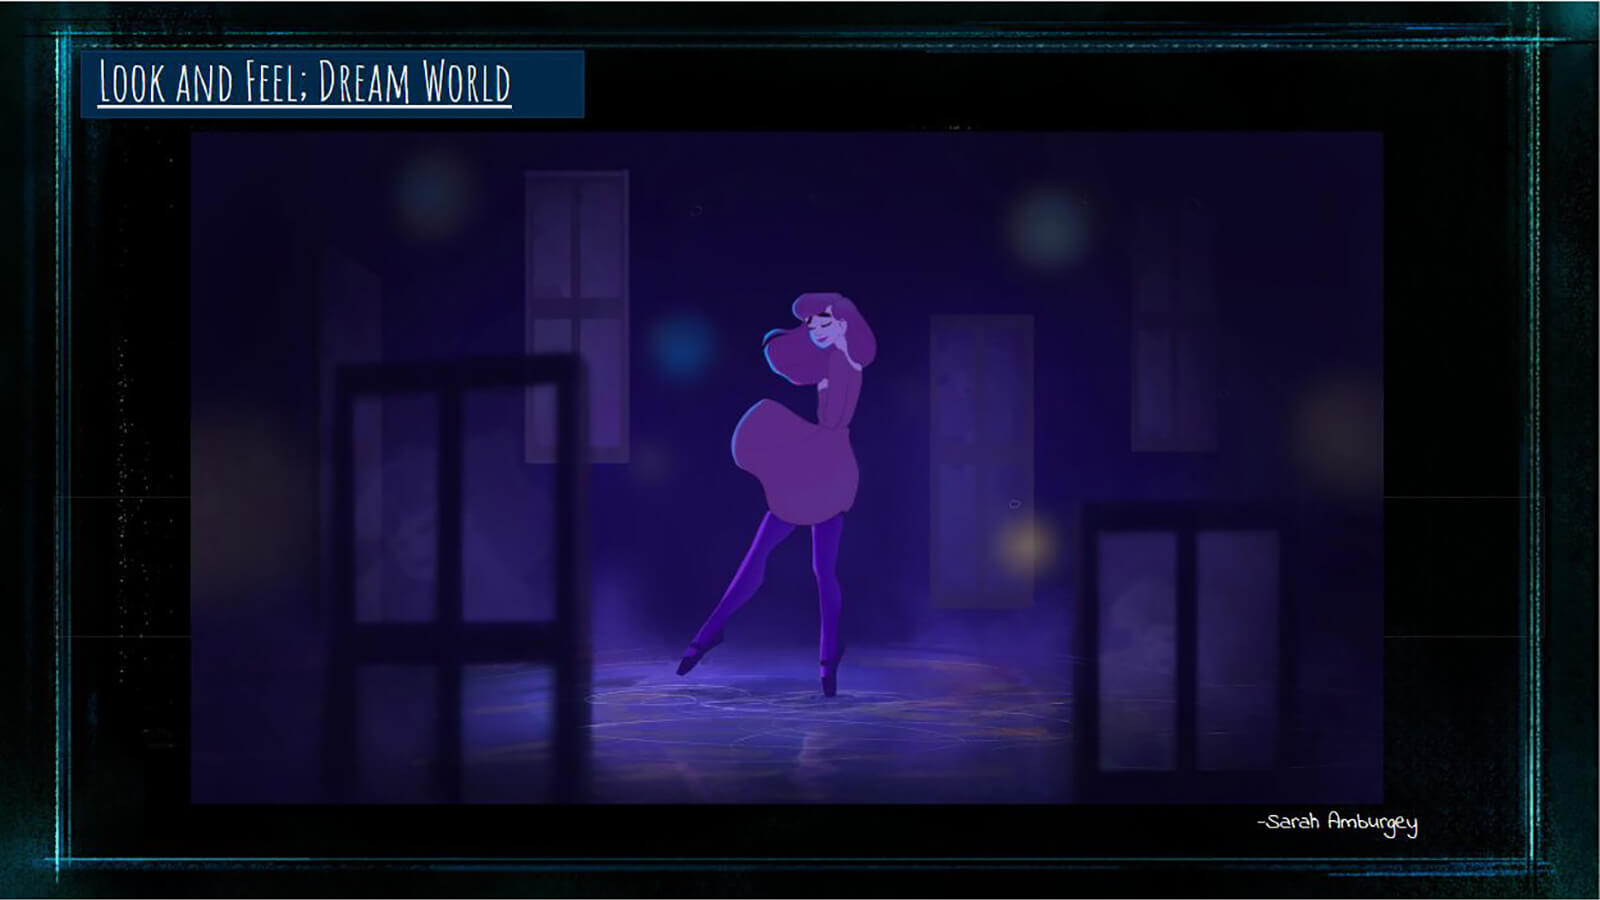 A "Look and Feel" slide for the film's dream world segment, showing the main character dancing in a hazy purple interior.